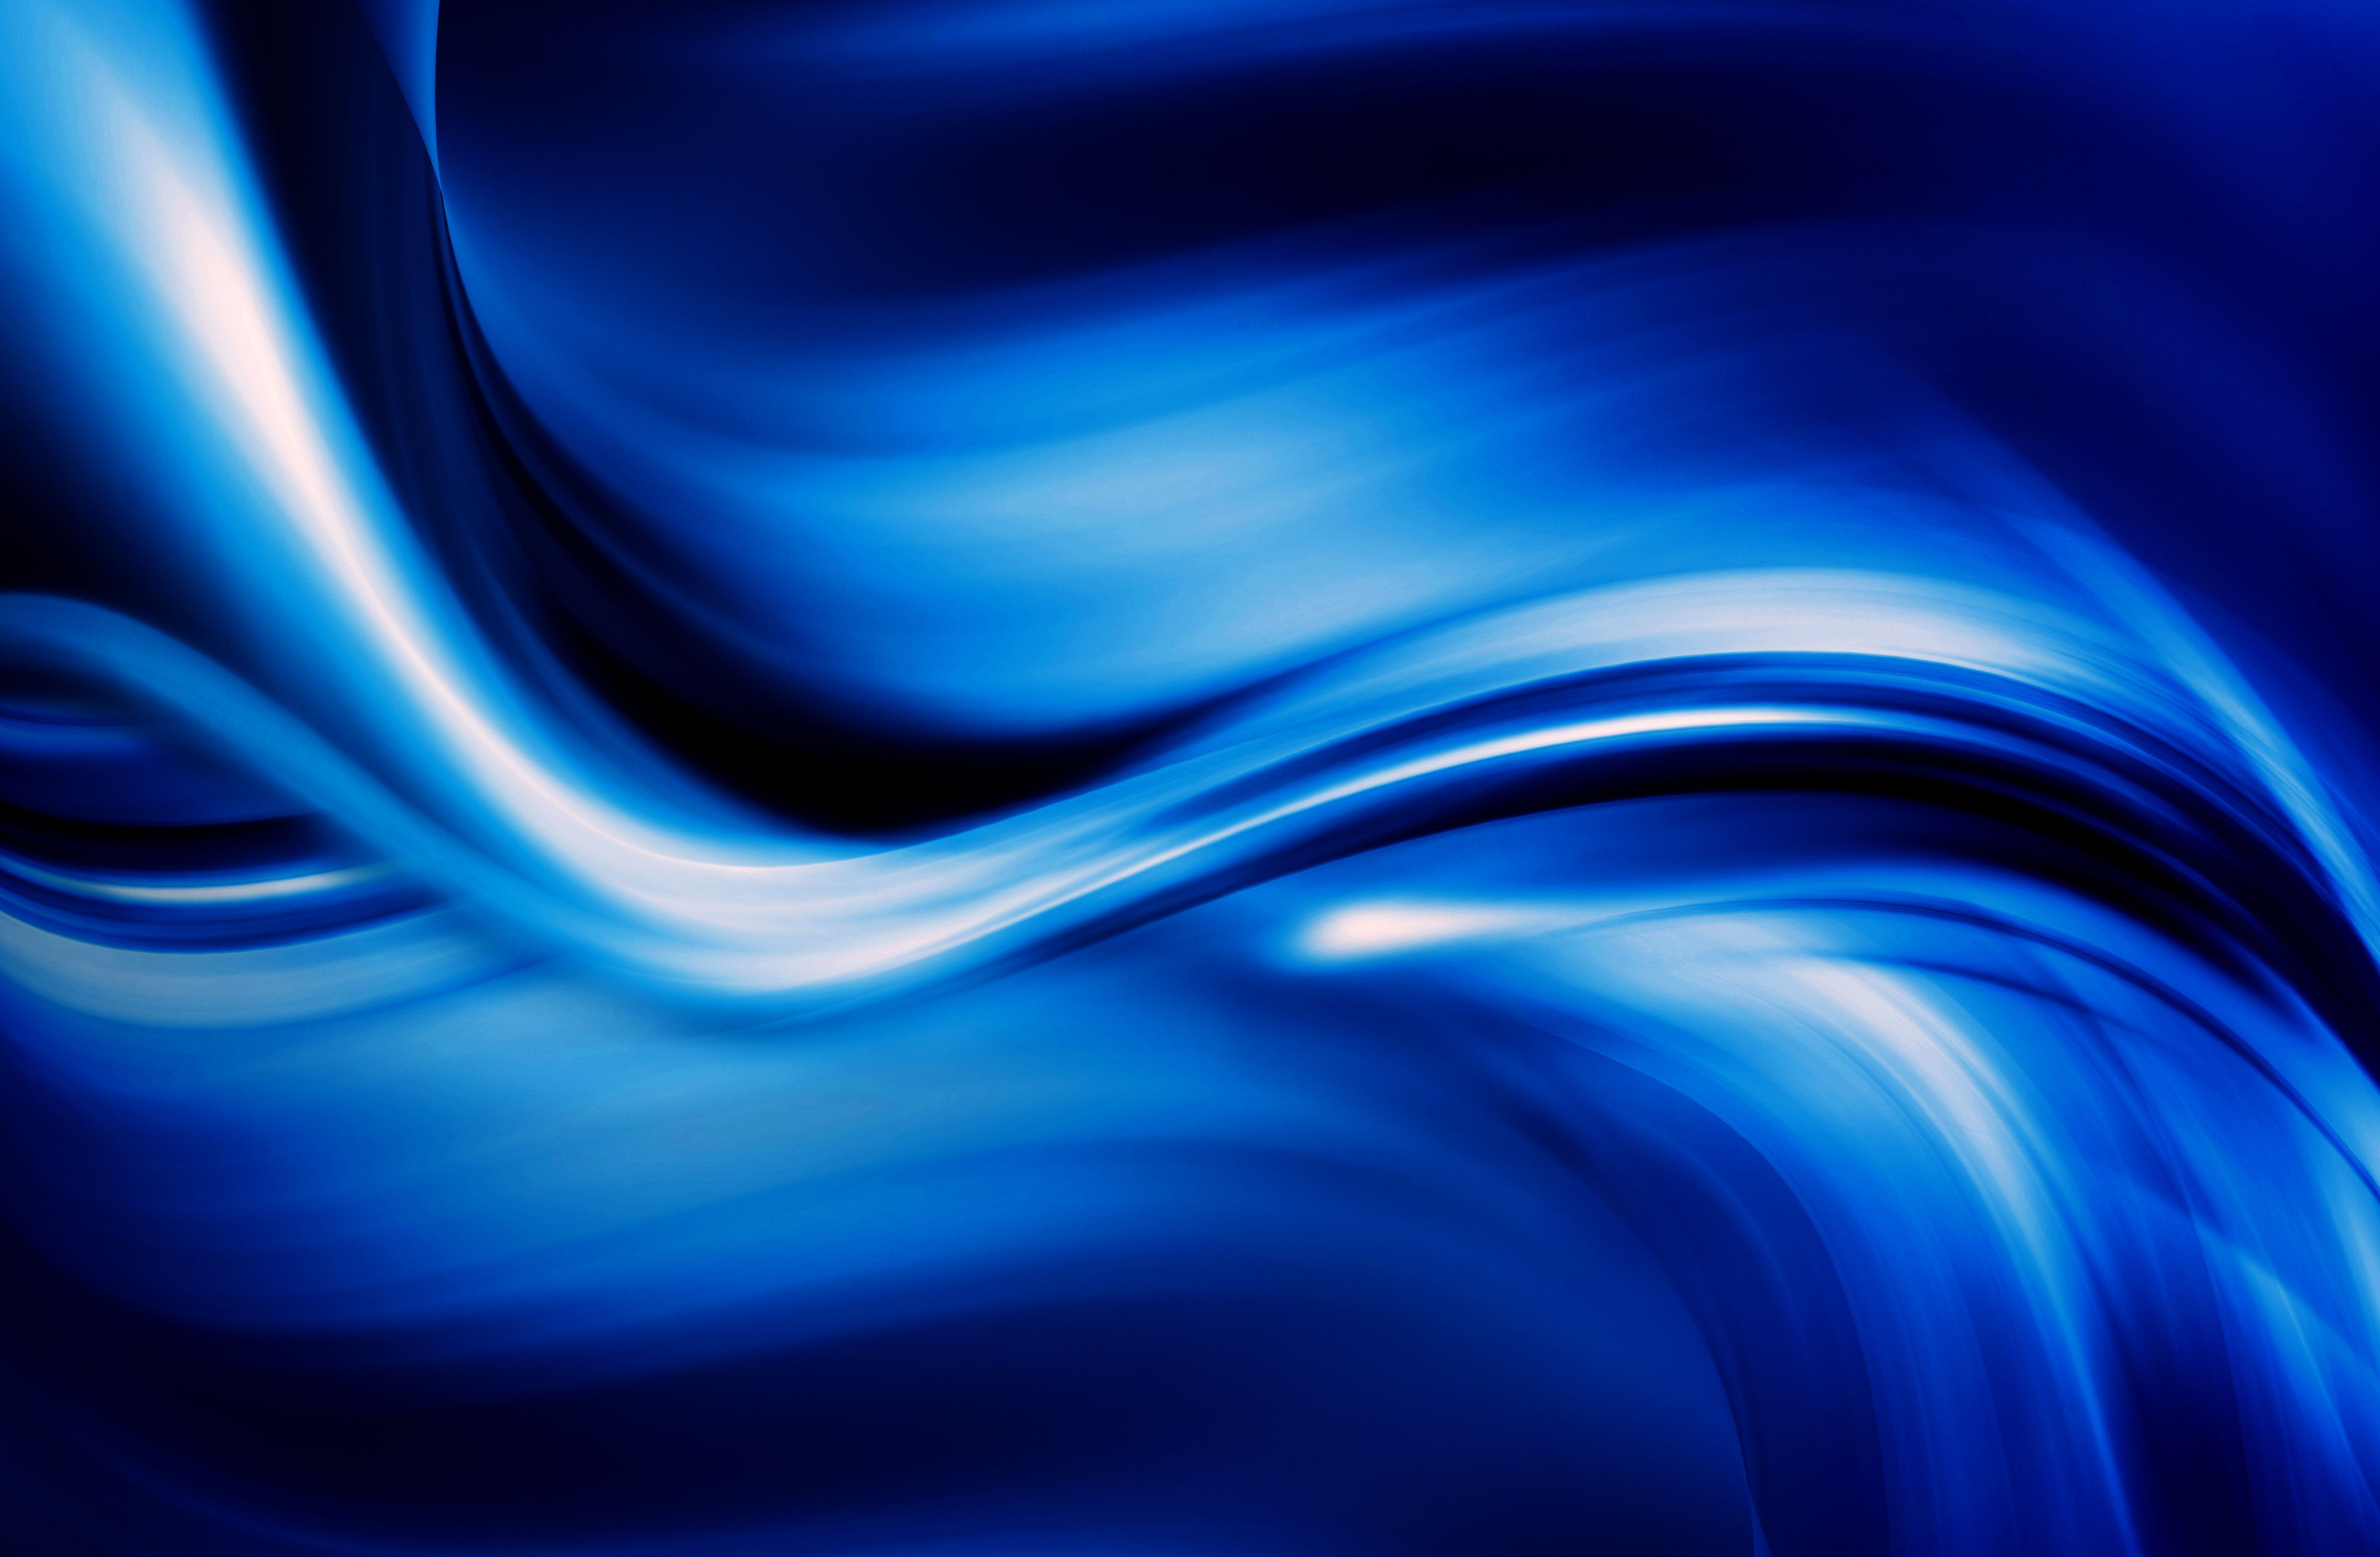 Another dark blue abstract background texture image www 5748x3760